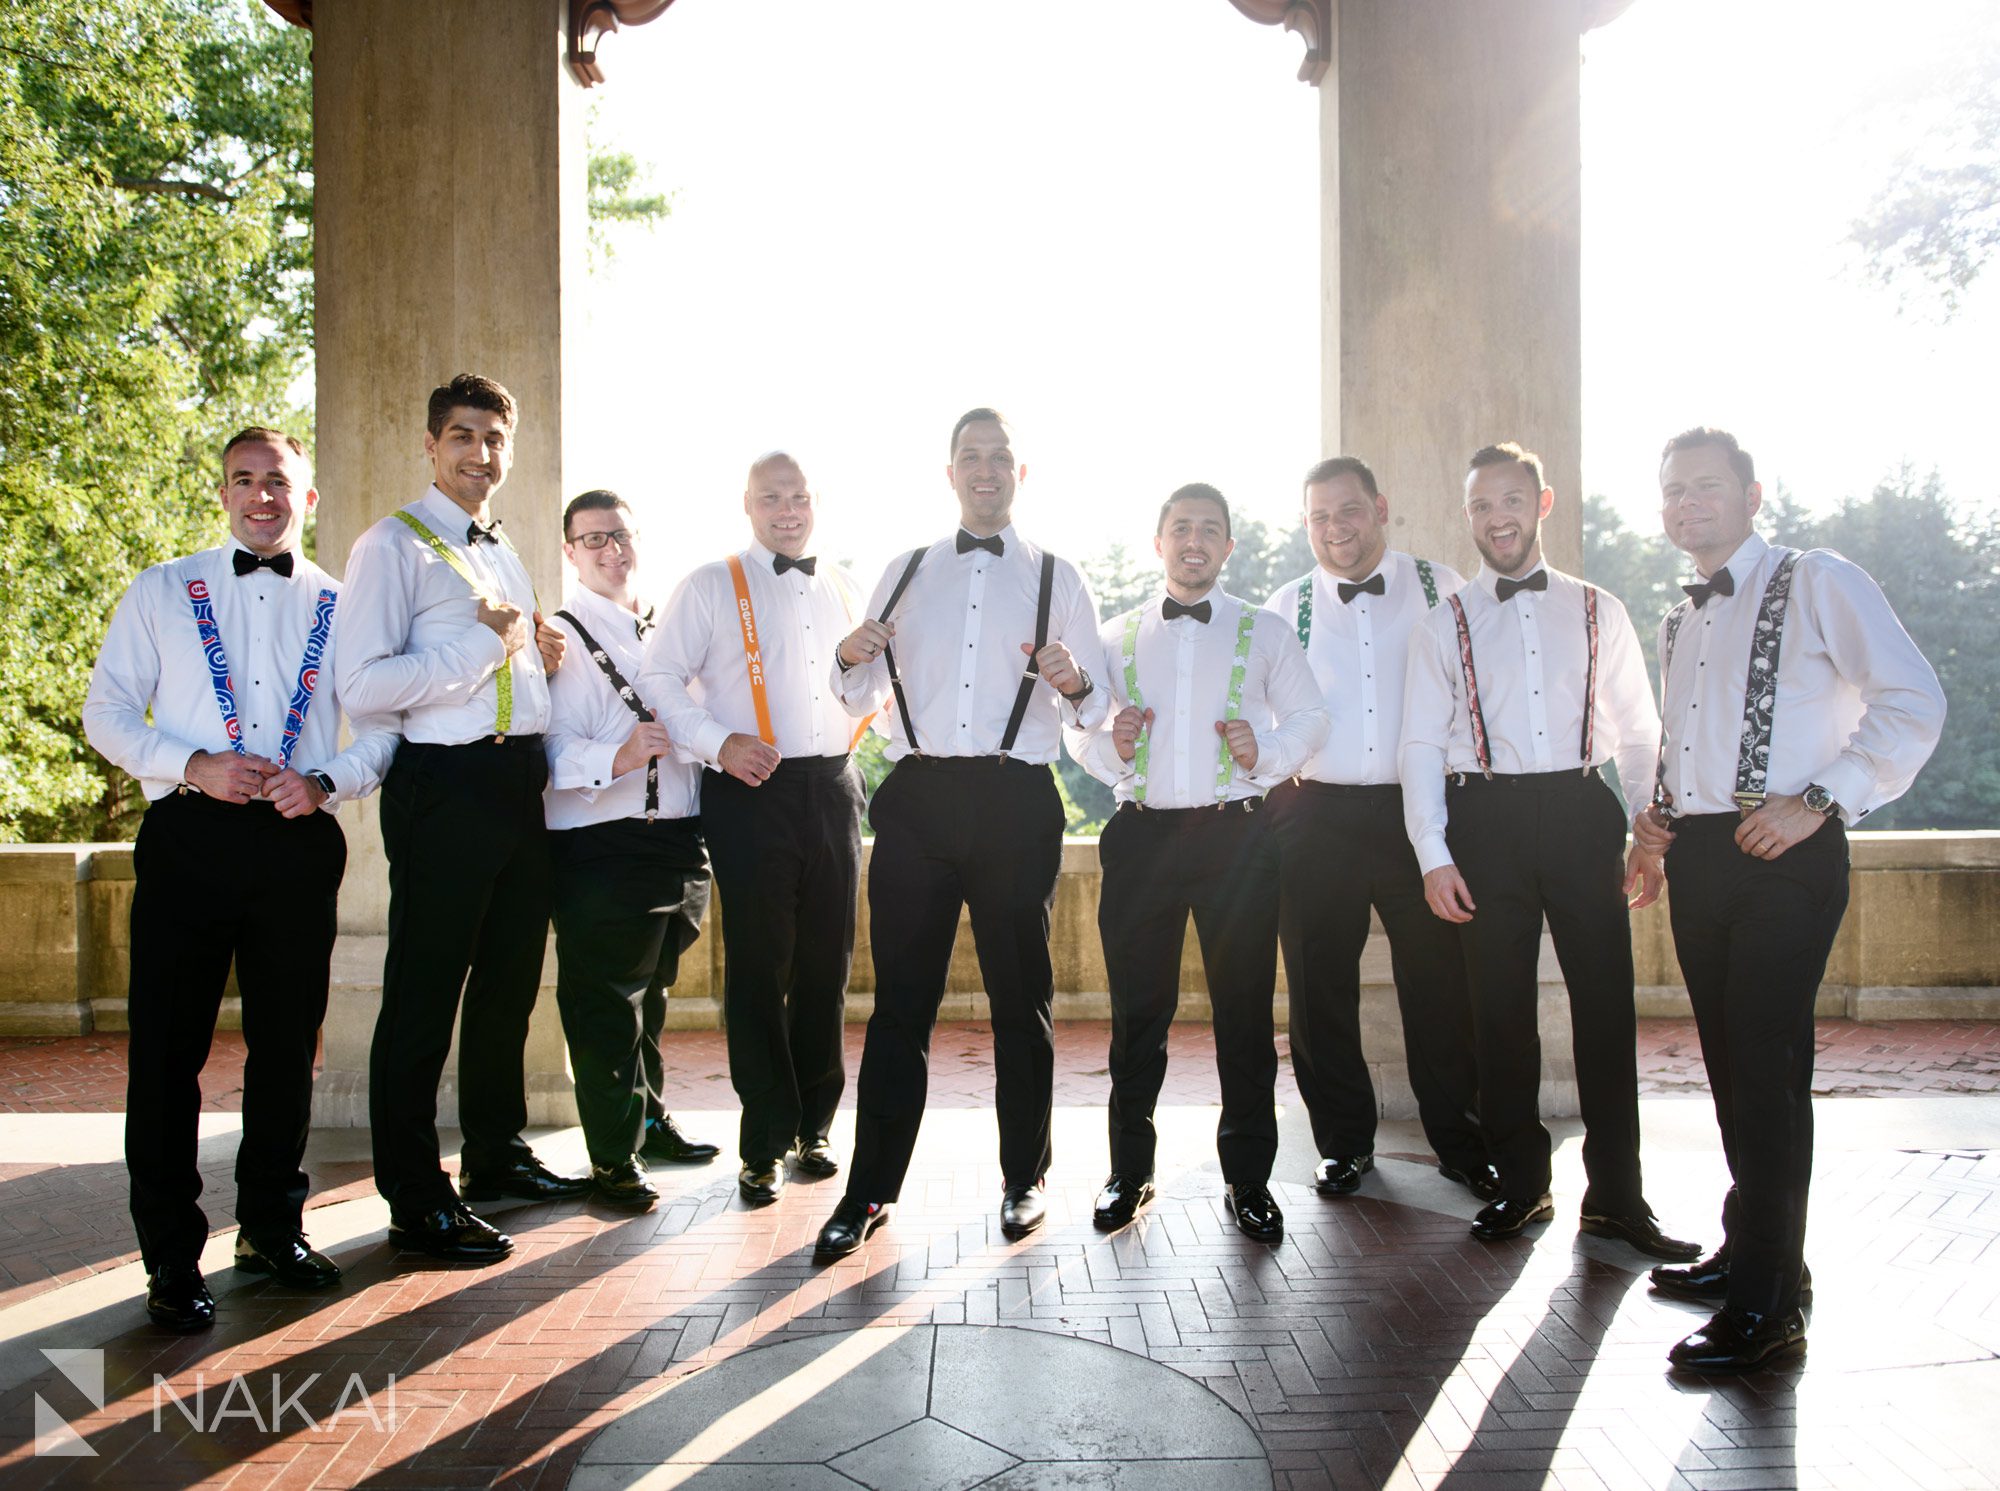 armour house wedding pictures bridal party